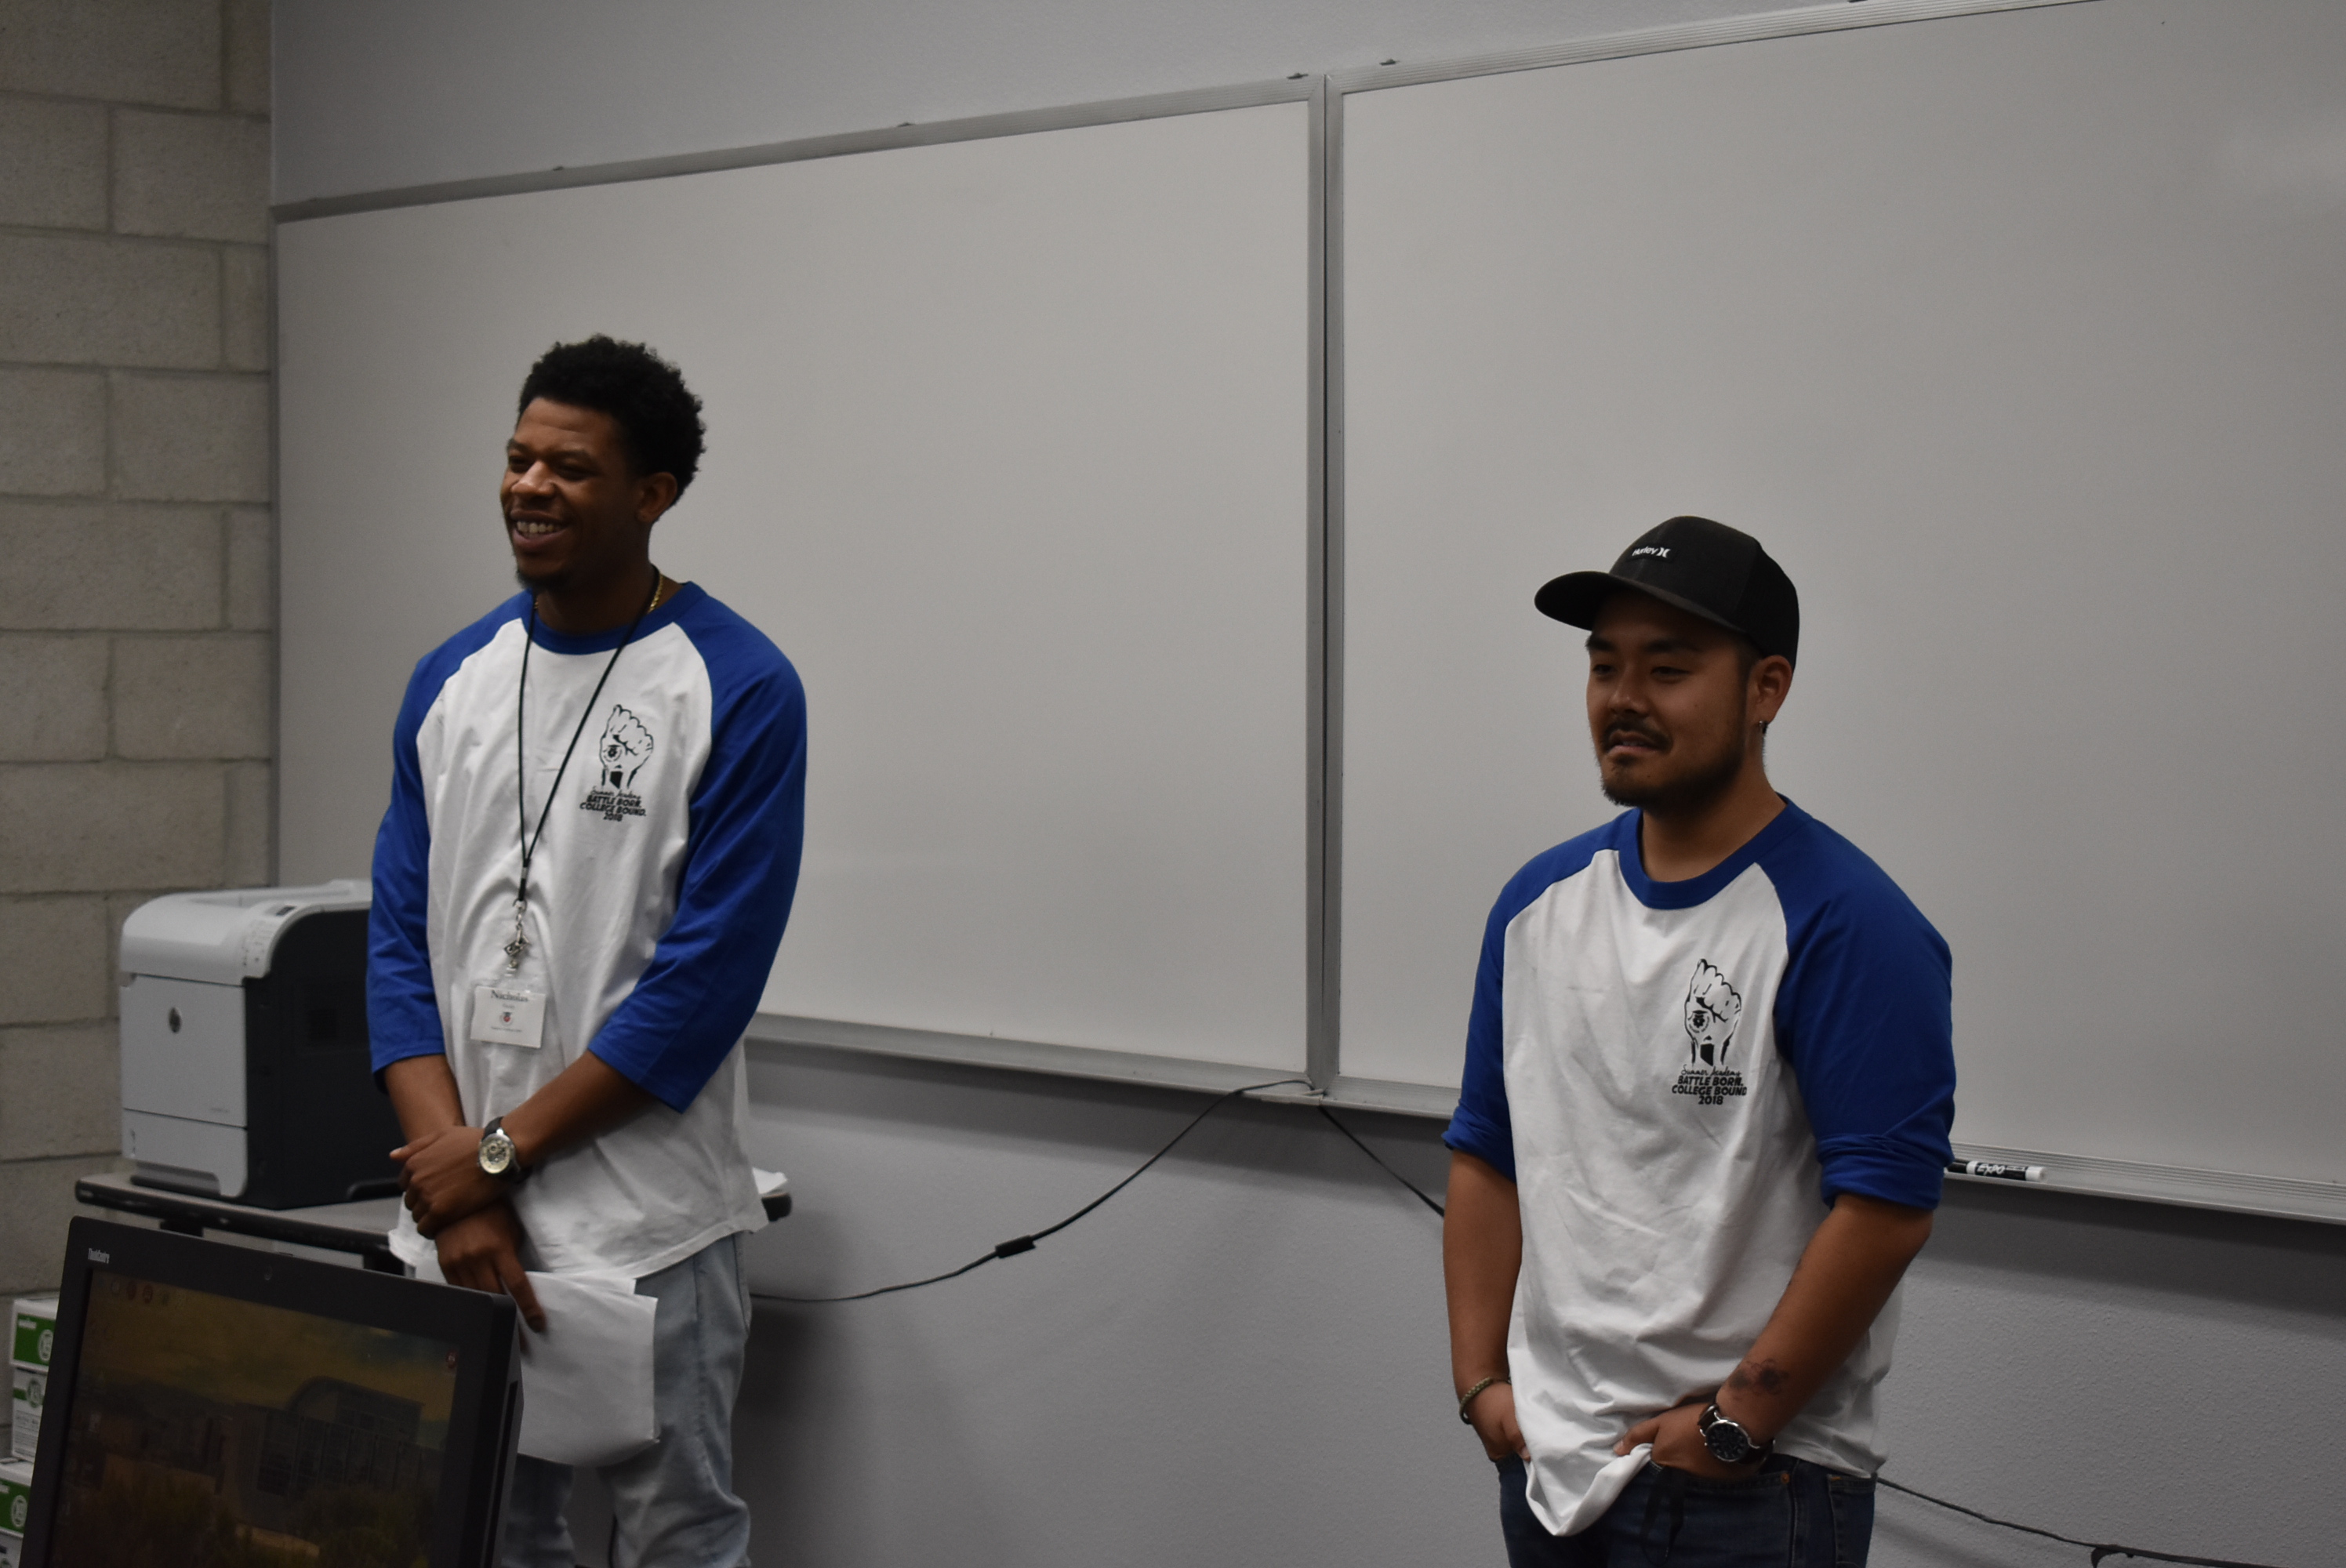 A pair of men wearing baseball tees with blue sleeves stand before a pair of blank whiteboards